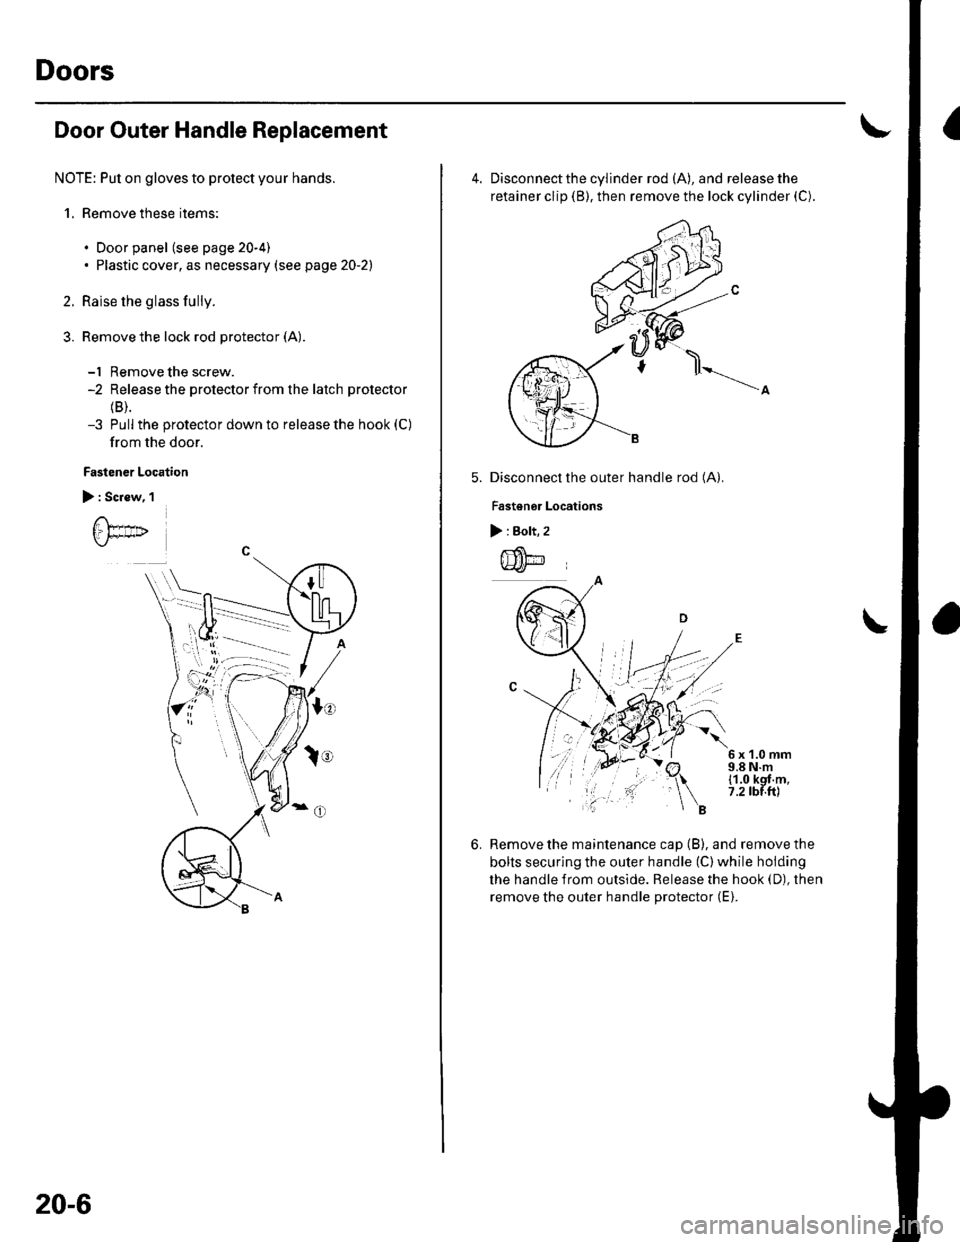 HONDA CIVIC 2003 7.G Workshop Manual Doors
Door Outer Handle Replacement
NOTE: Put on gloves to protect your hands.
1, Remove these items:
. Door panel (see page 20-4). Plastic cover, as necessary (see page 20-2)
Raise the glass fully.
R